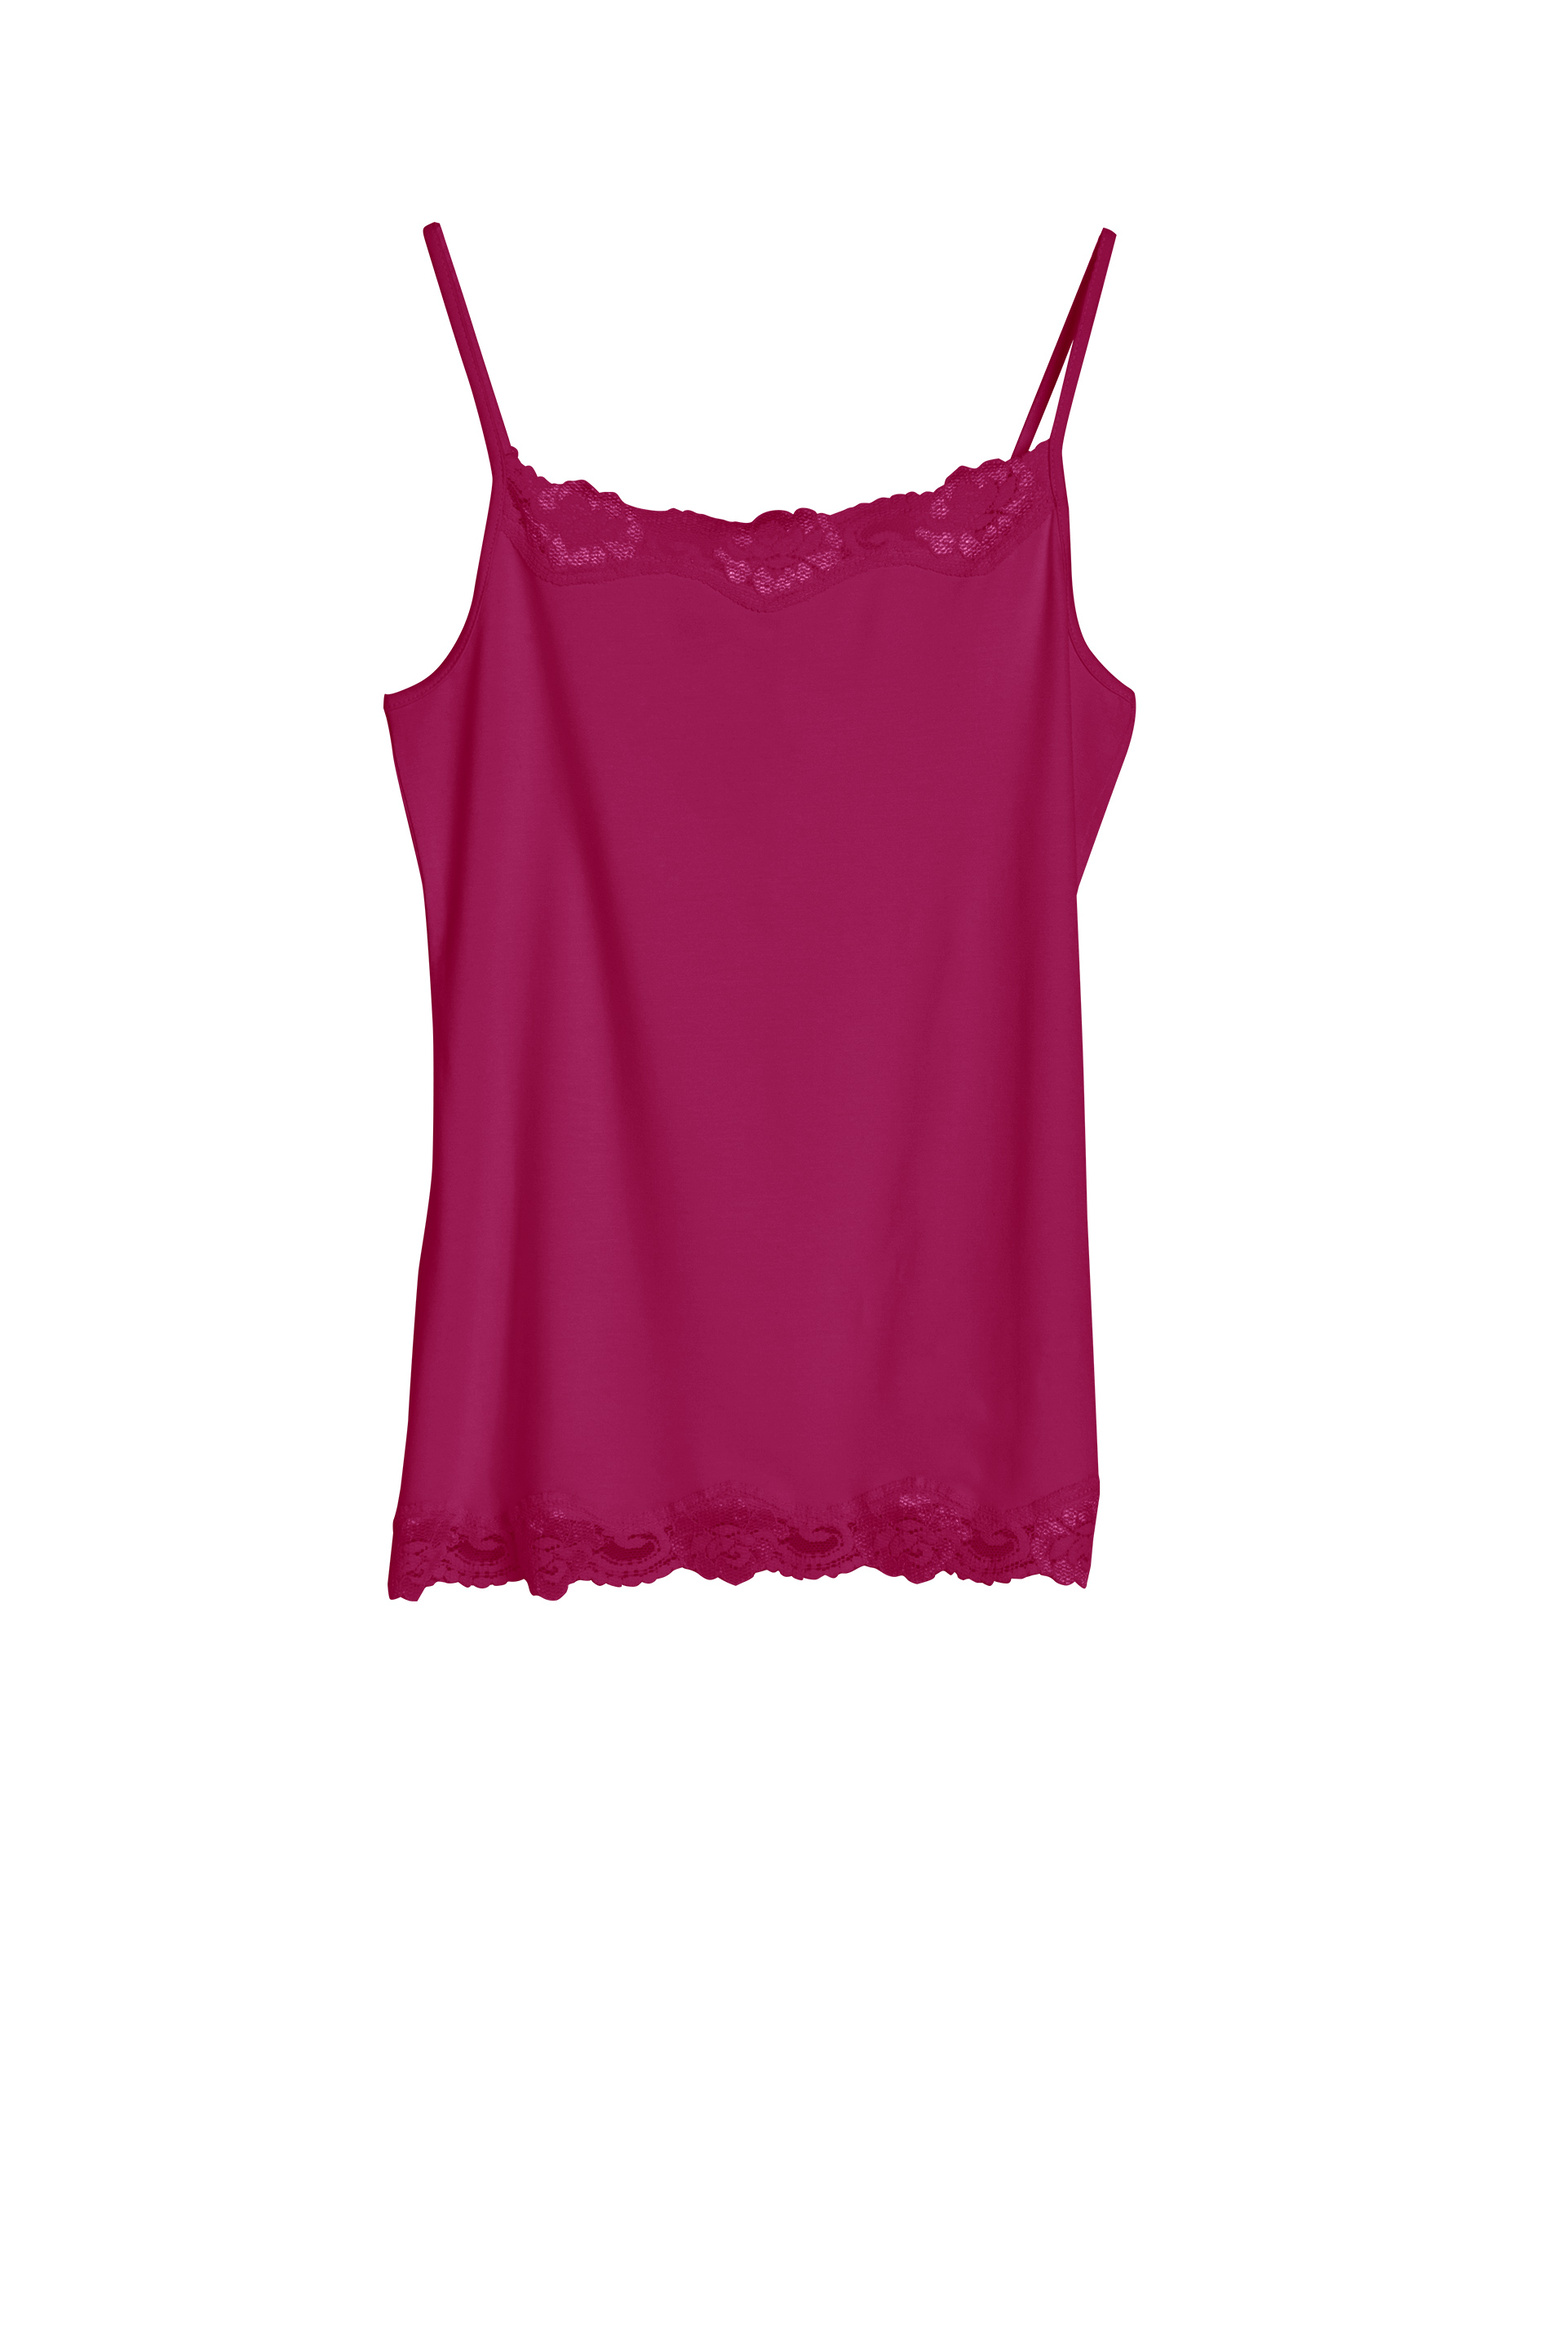 7200_lace_camisole_mulberry_new.jpg